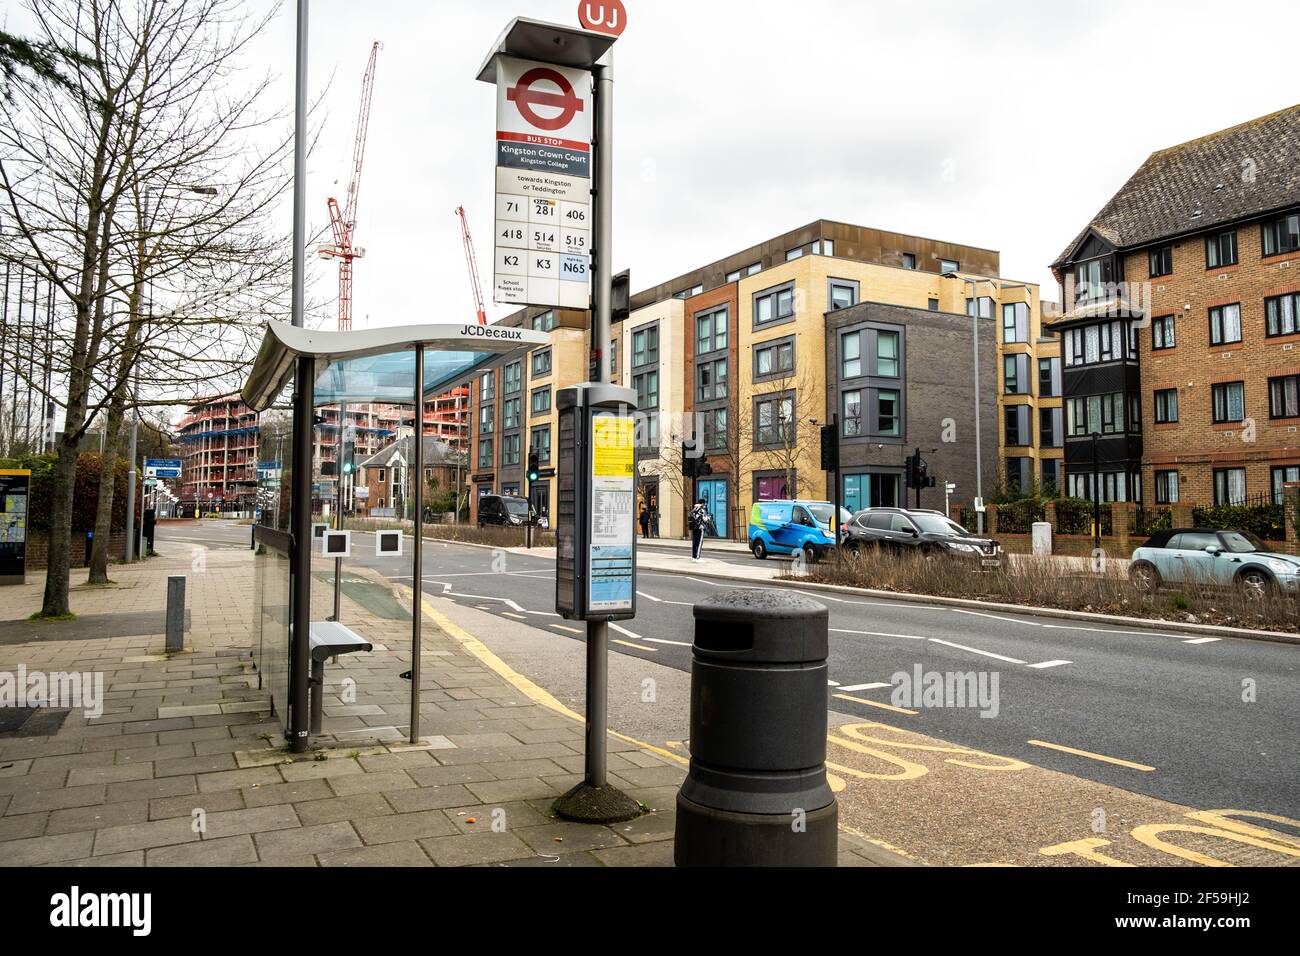 London UK, March 25 2021, Bus Stop Or Shelter With No People Stock Photo